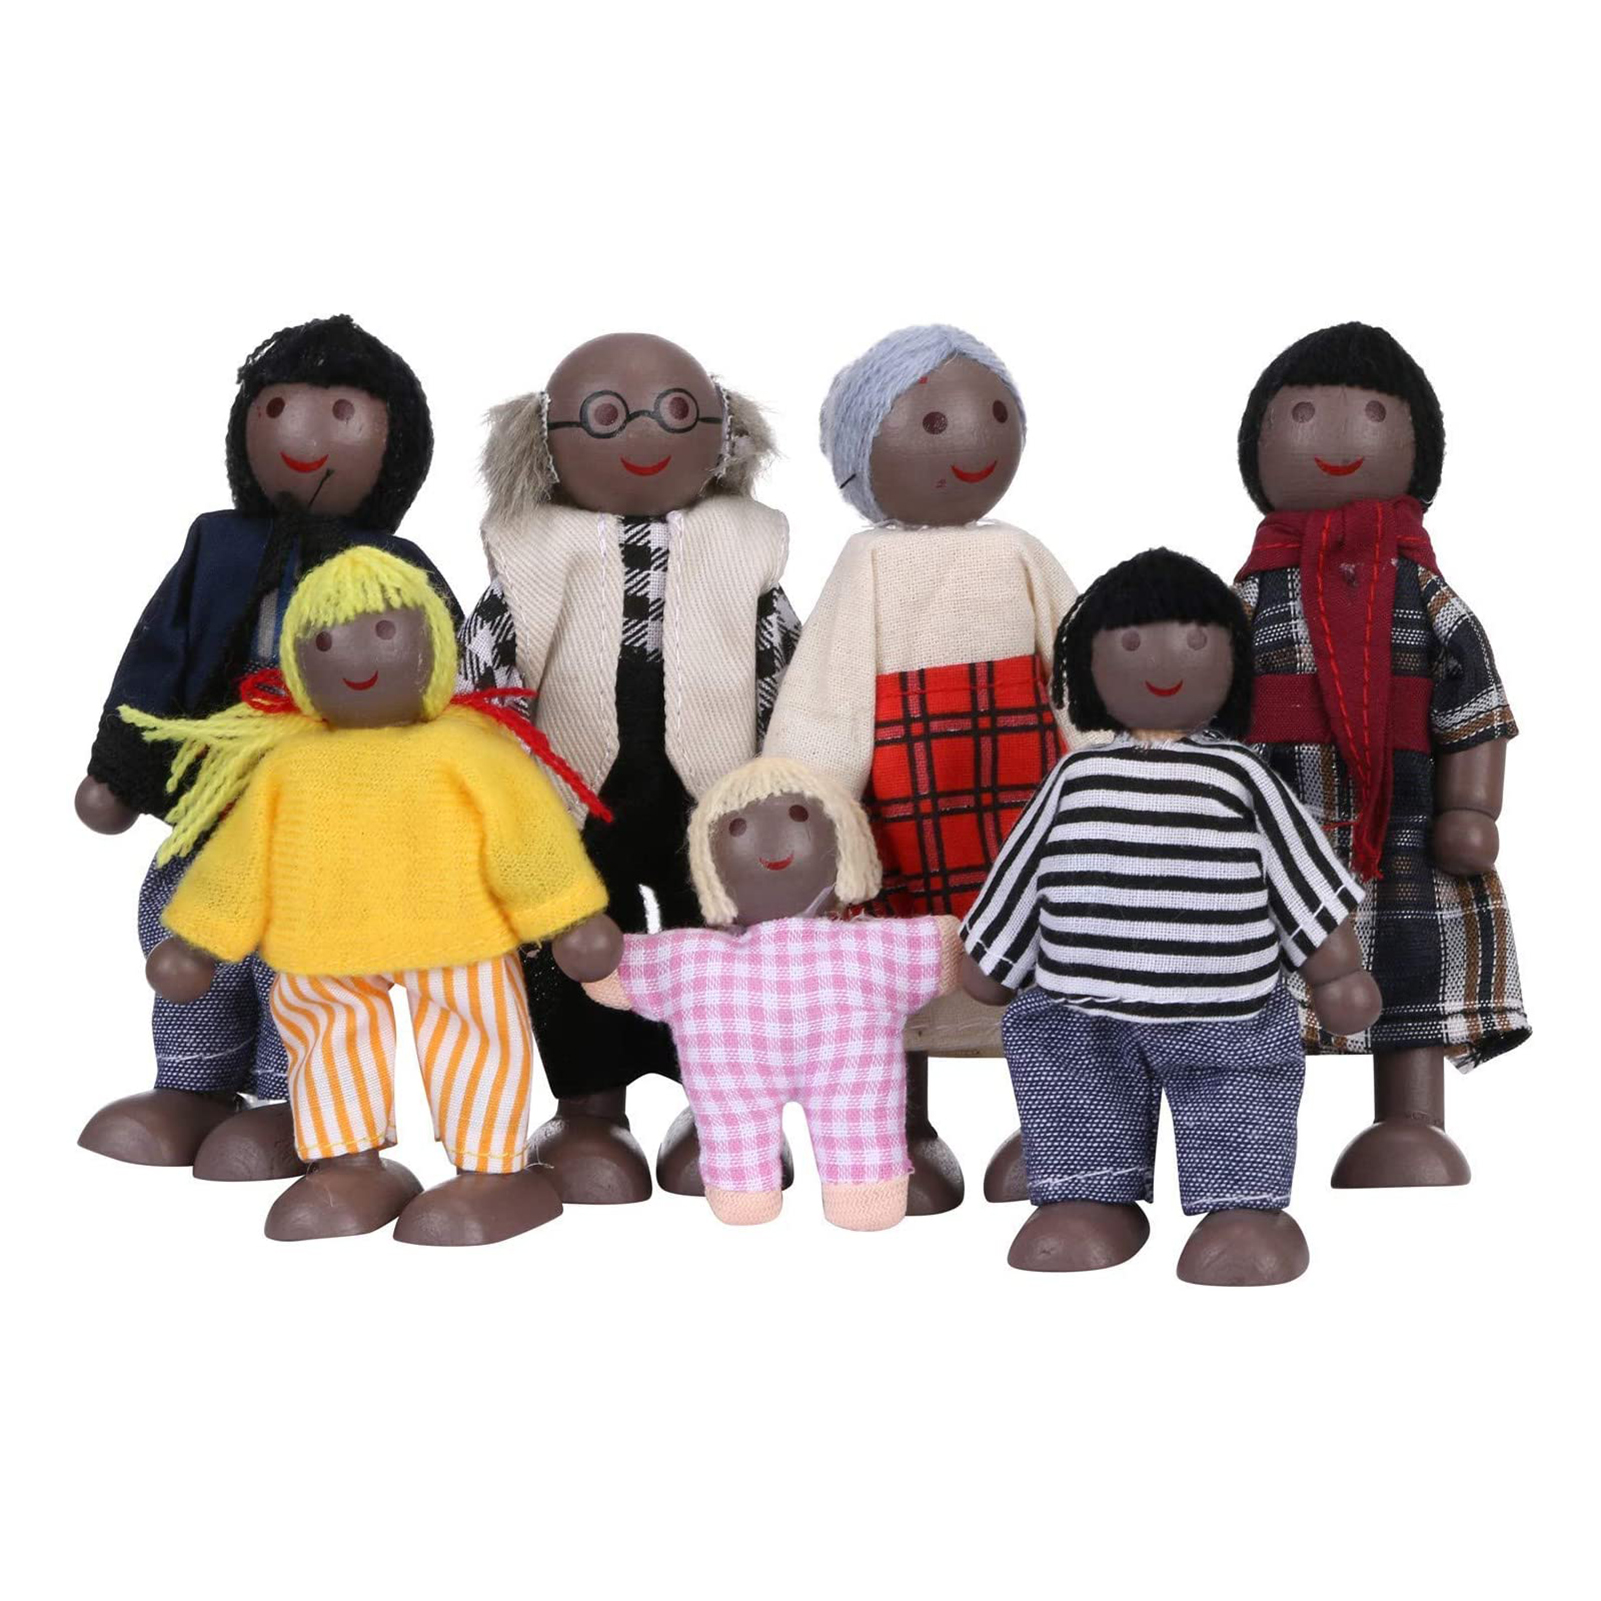 7pcs Wooden Doll Family Educational Wooden Toys For Children Dollhouses Pretend Gift - image 1 of 6